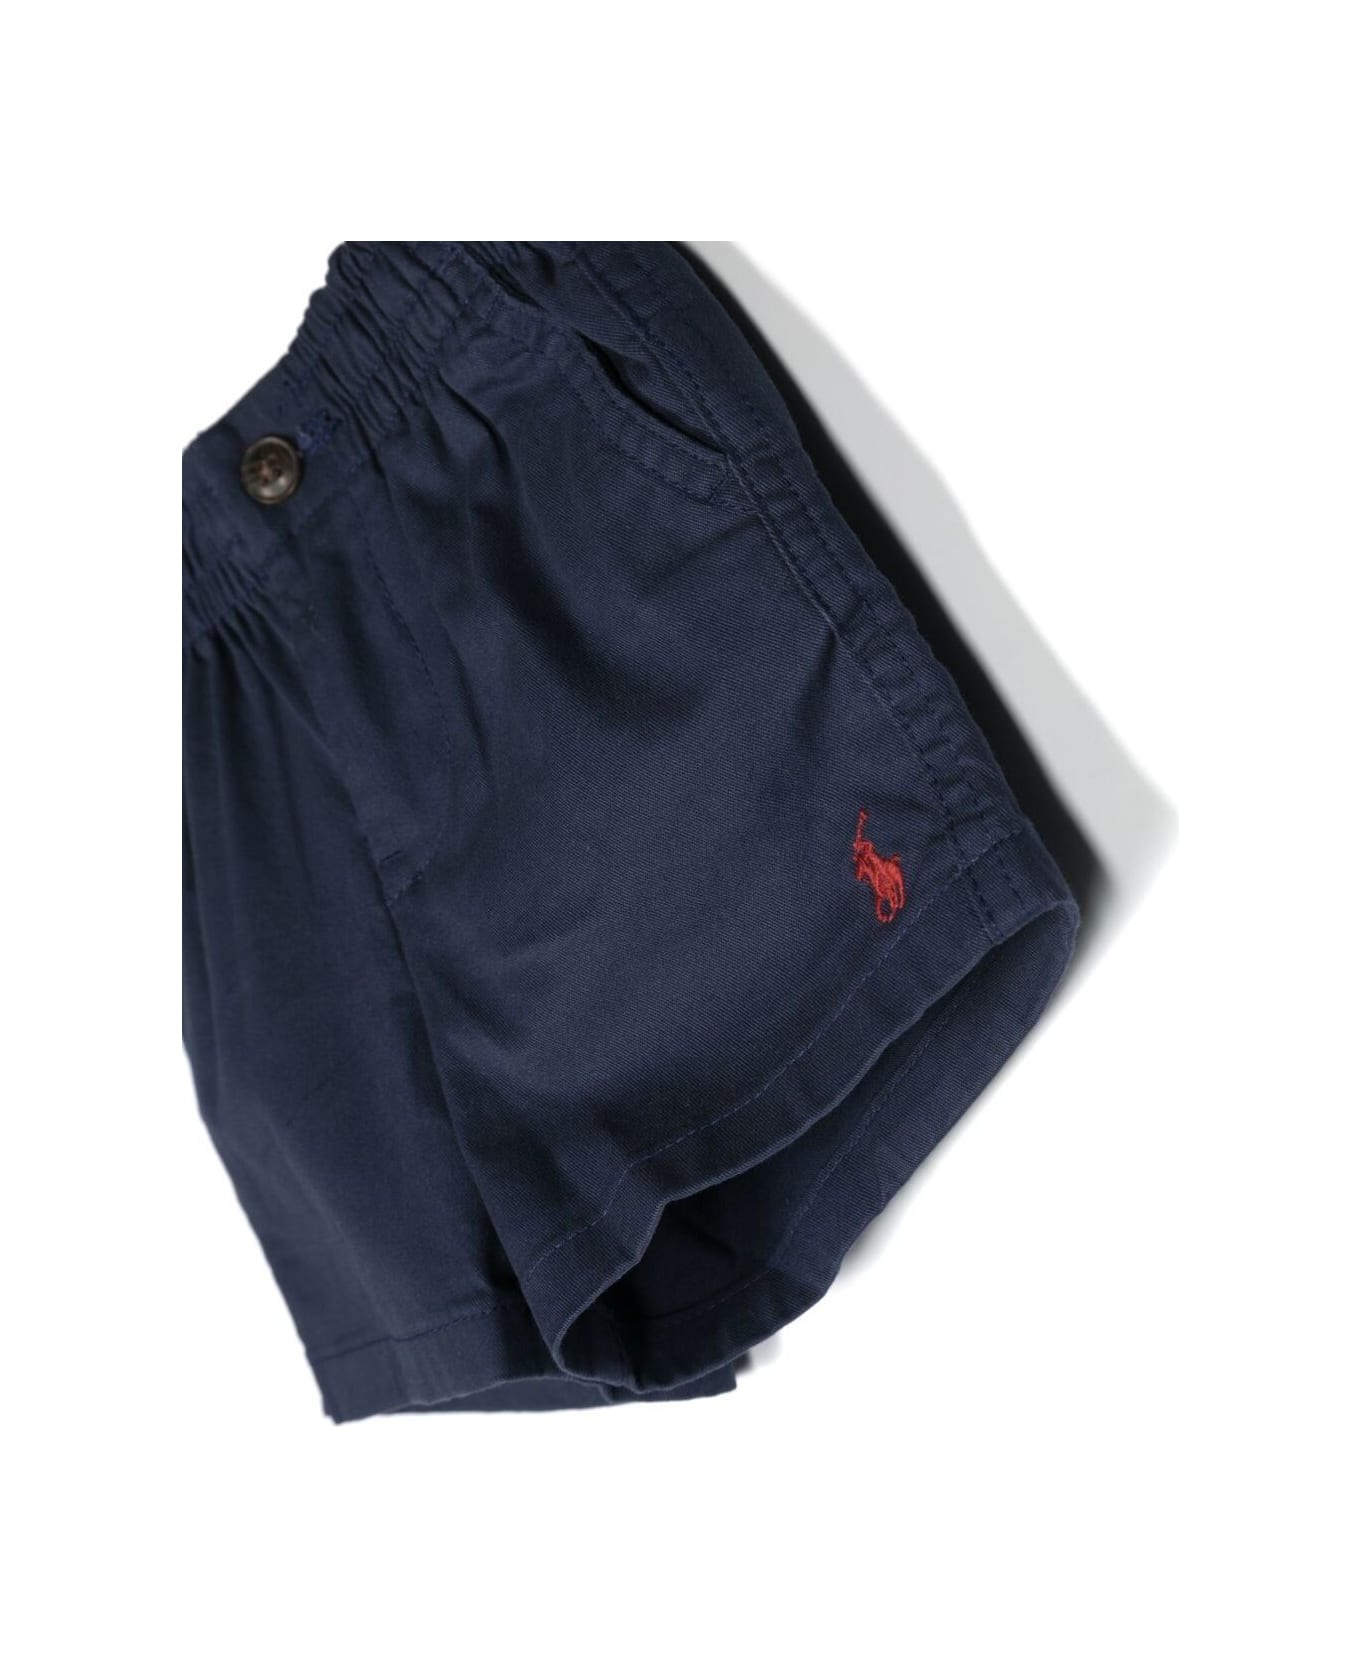 Polo Ralph Lauren Blue Shorts With Elastic Waistband And Pony Embroidery In Stretch Cotton Baby - Blu ボトムス